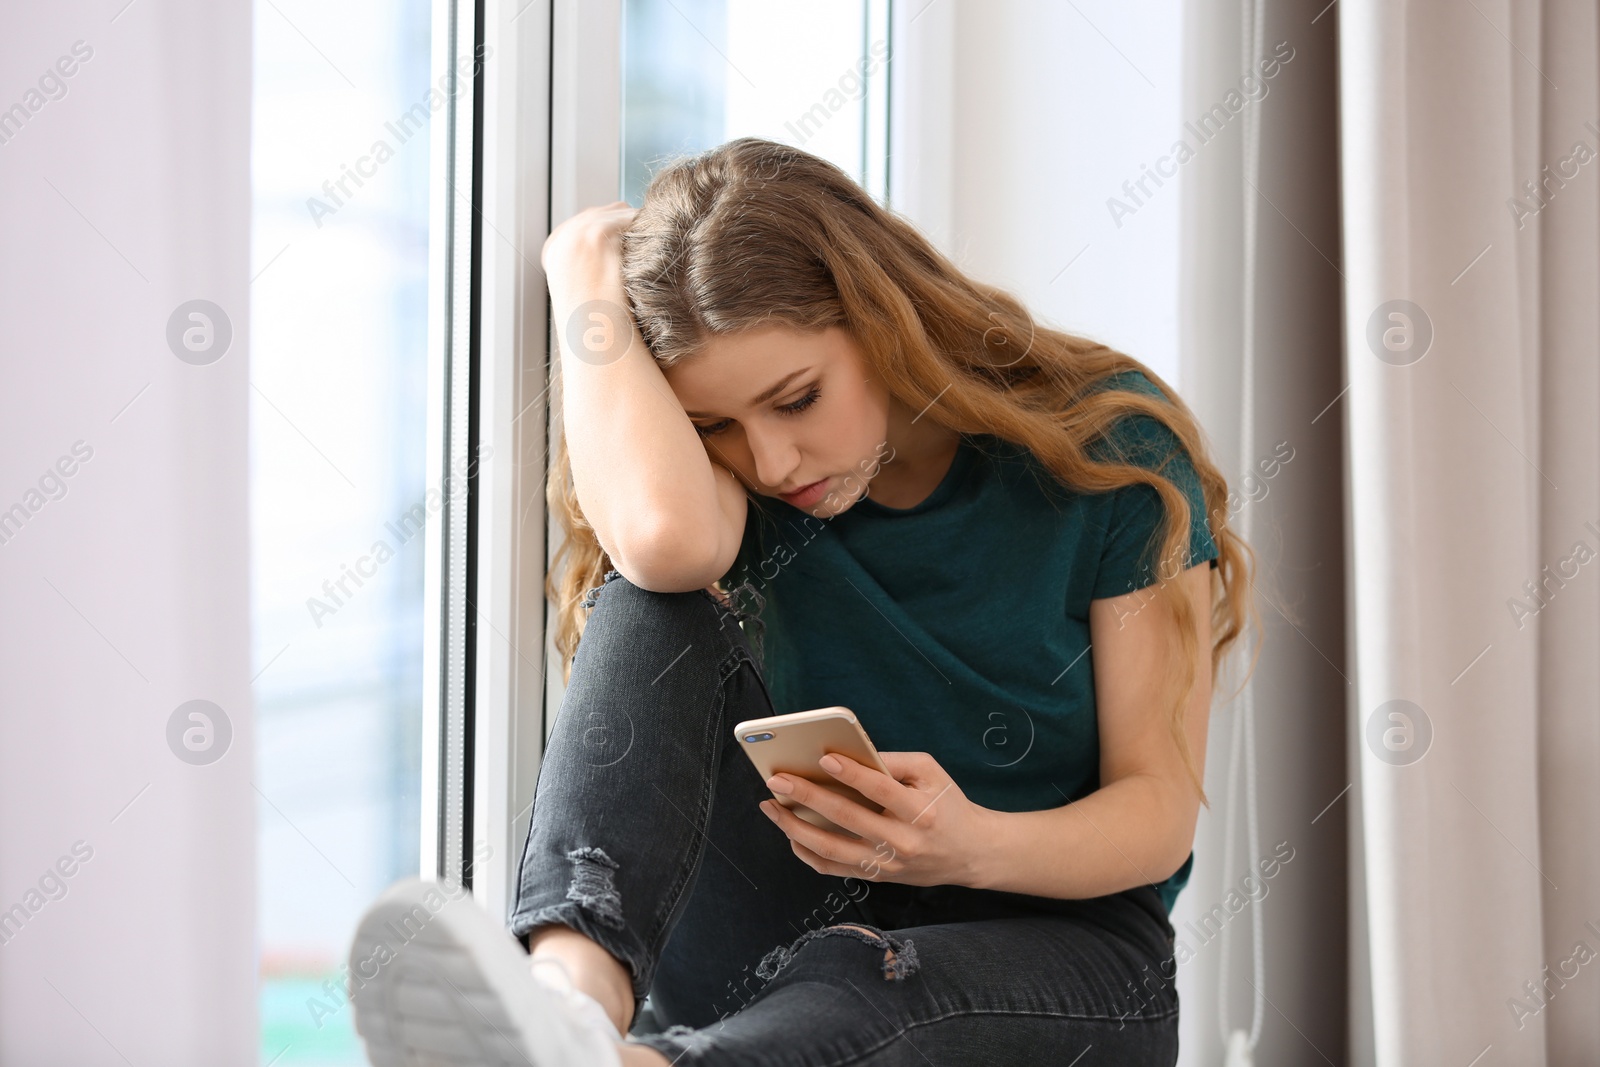 Photo of Upset woman with smartphone sitting on window sill indoors. Loneliness concept